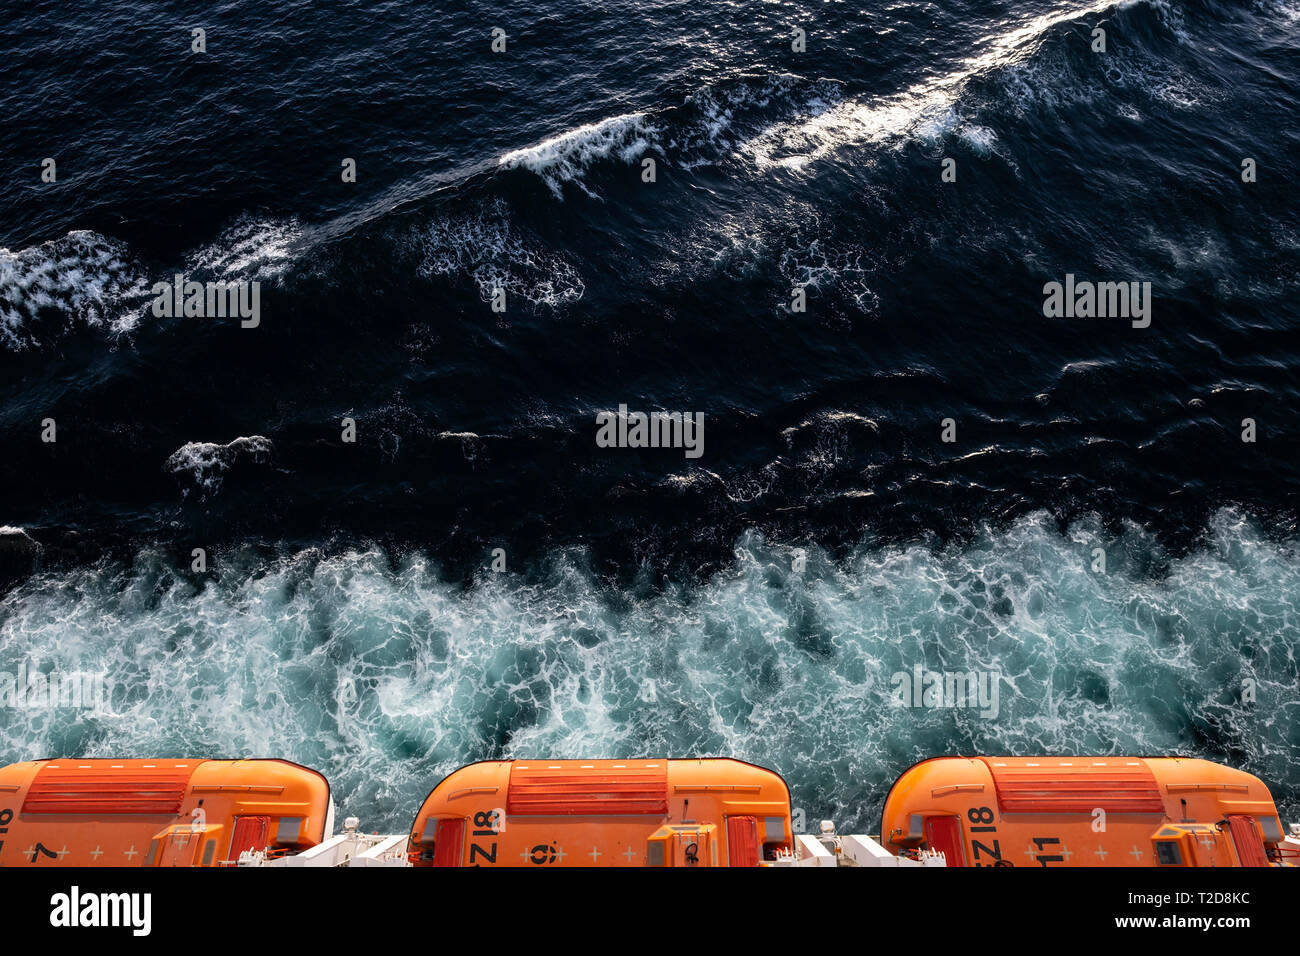 Overhead view of three orange lifeboats hanging from the cruise ship MSC Splendida at sea Stock Photo